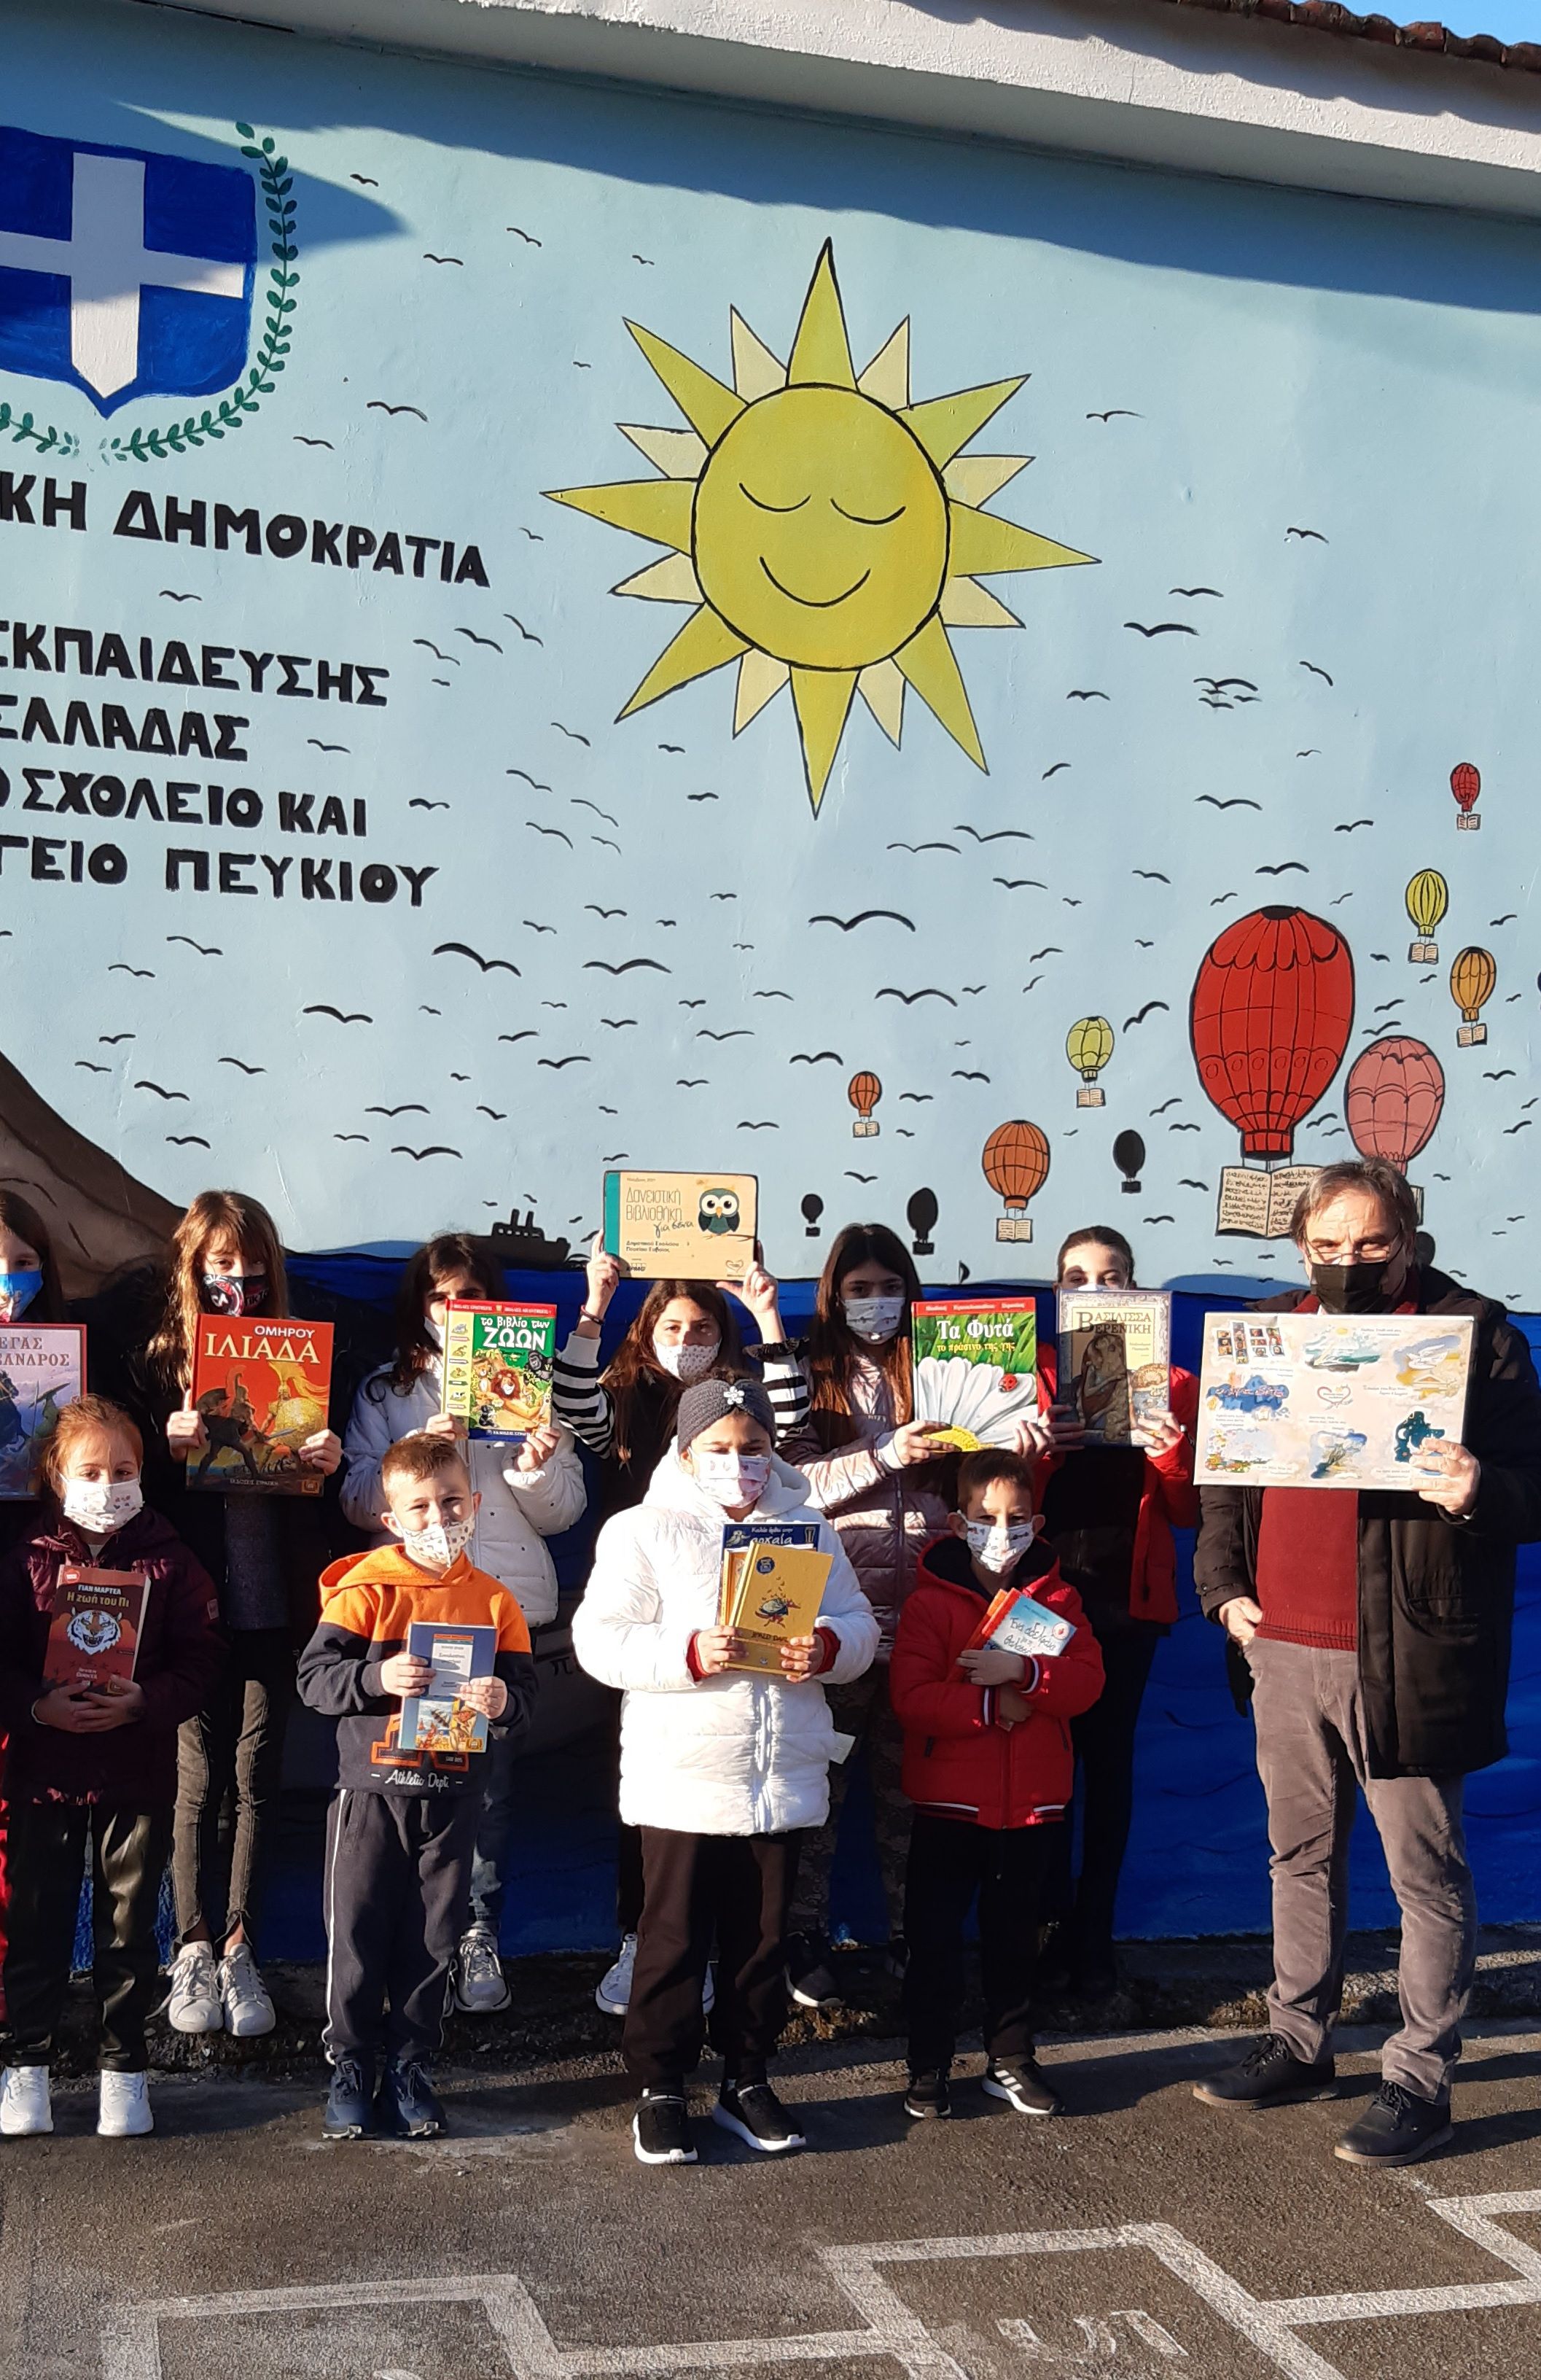 KPMG in collaboration with the Hellenic Book Club for more than 6 years, creates and enriches libraries throughout Greece by participating in KPMG’s Family for Literacy (KFFL) international program to combat child illiteracy.